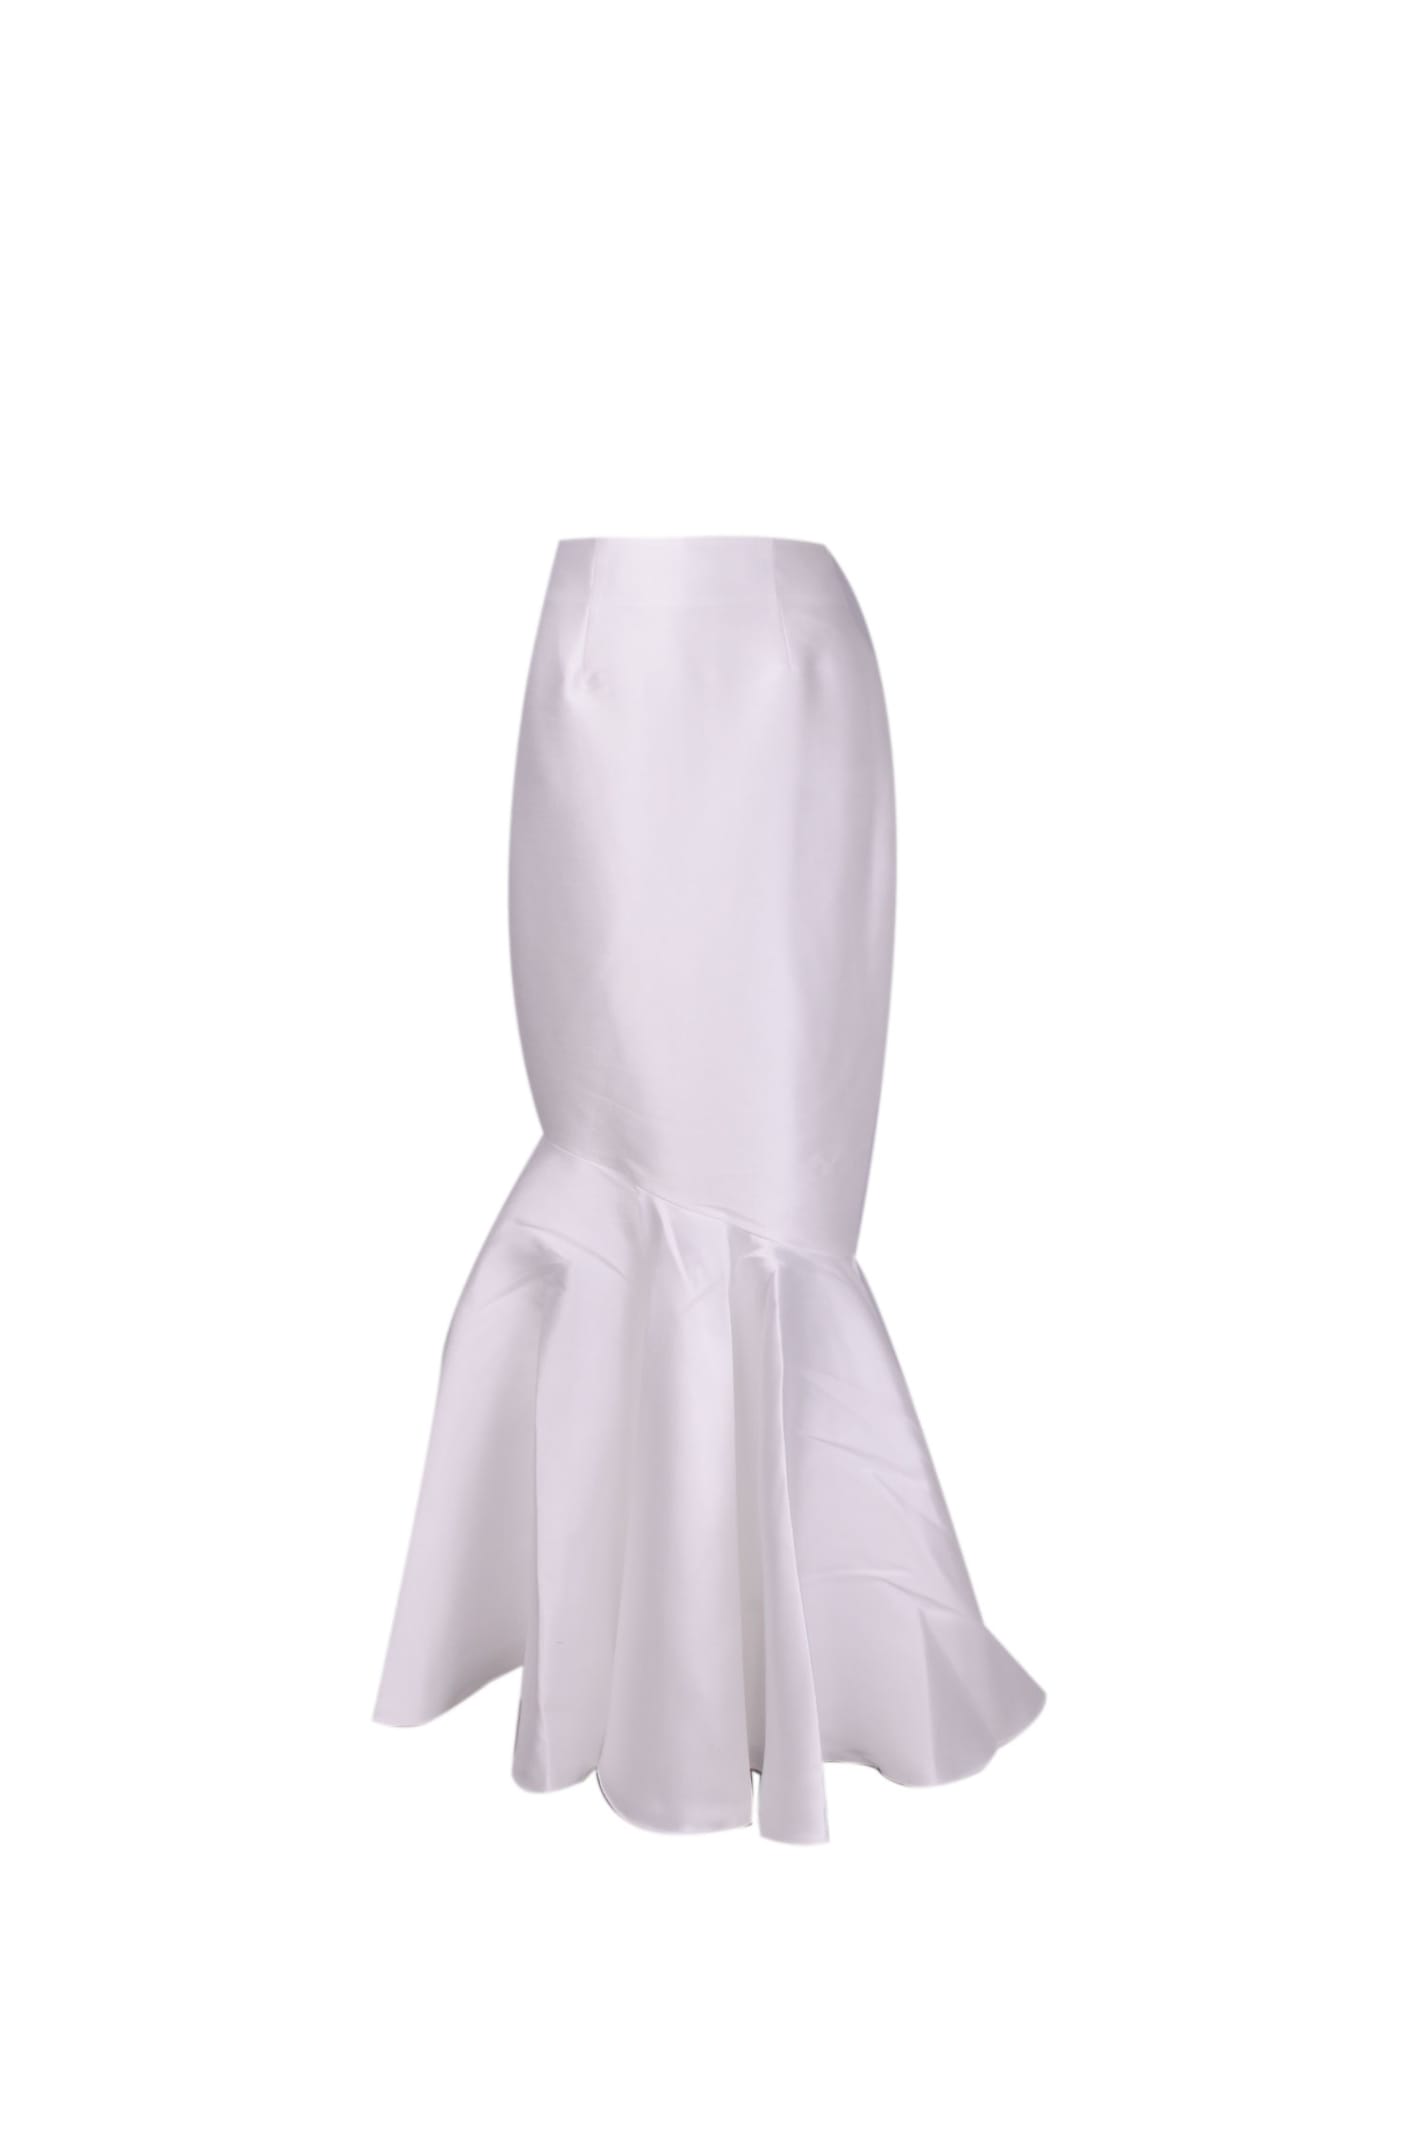 Solace London Skirt In White